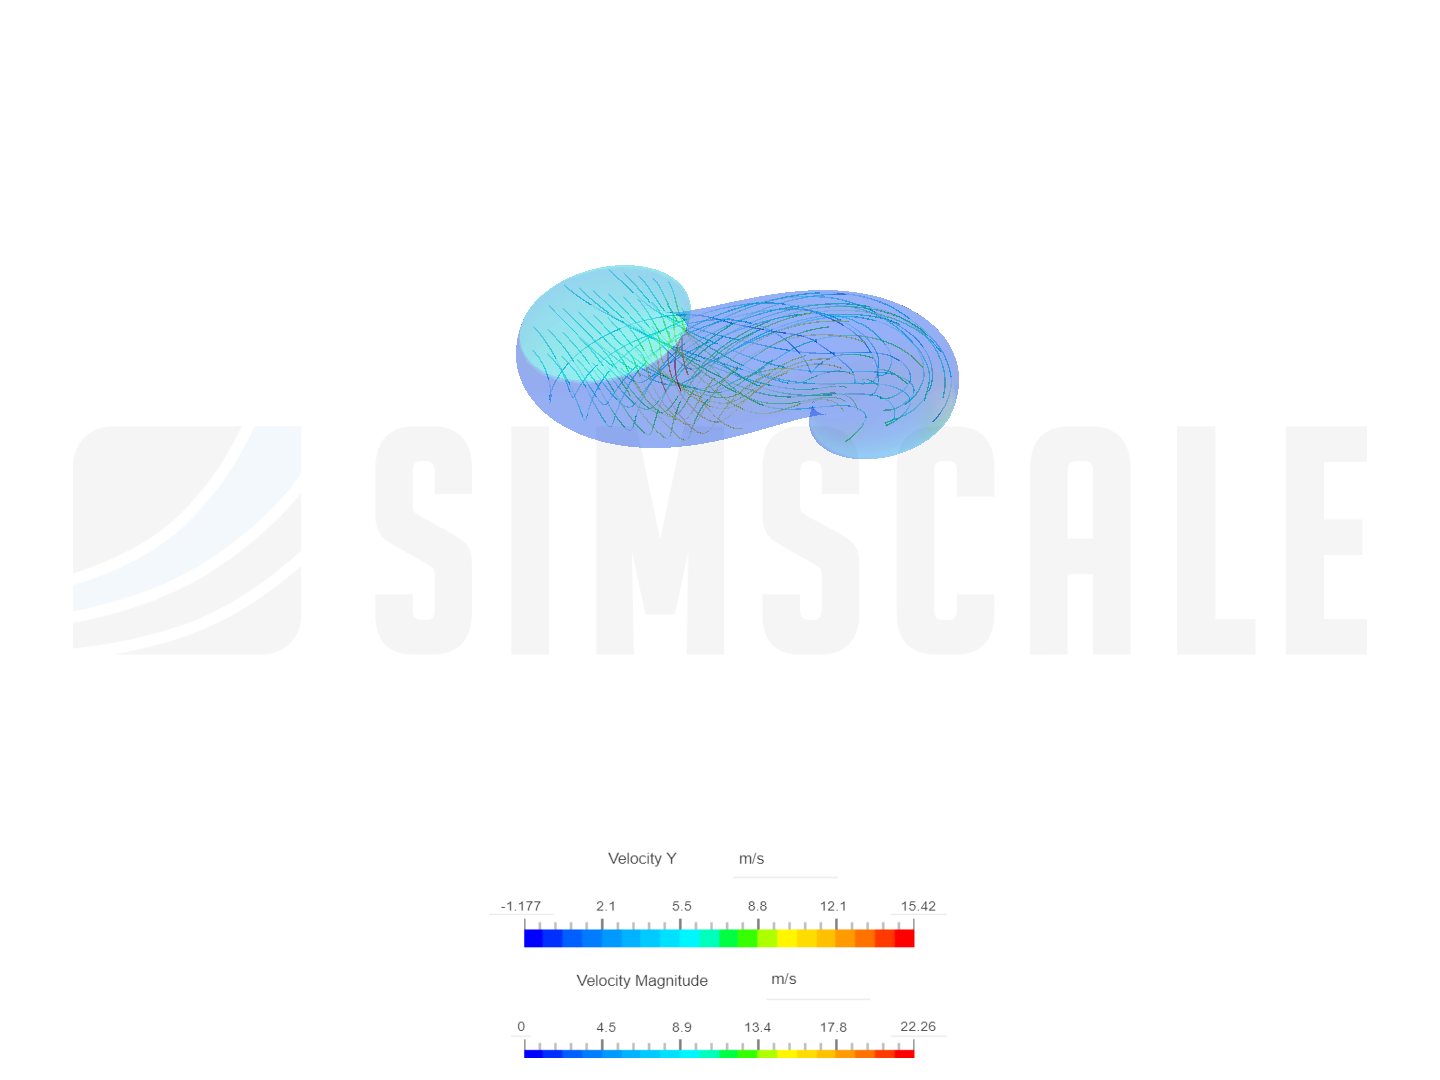 wind simulation of single channel image